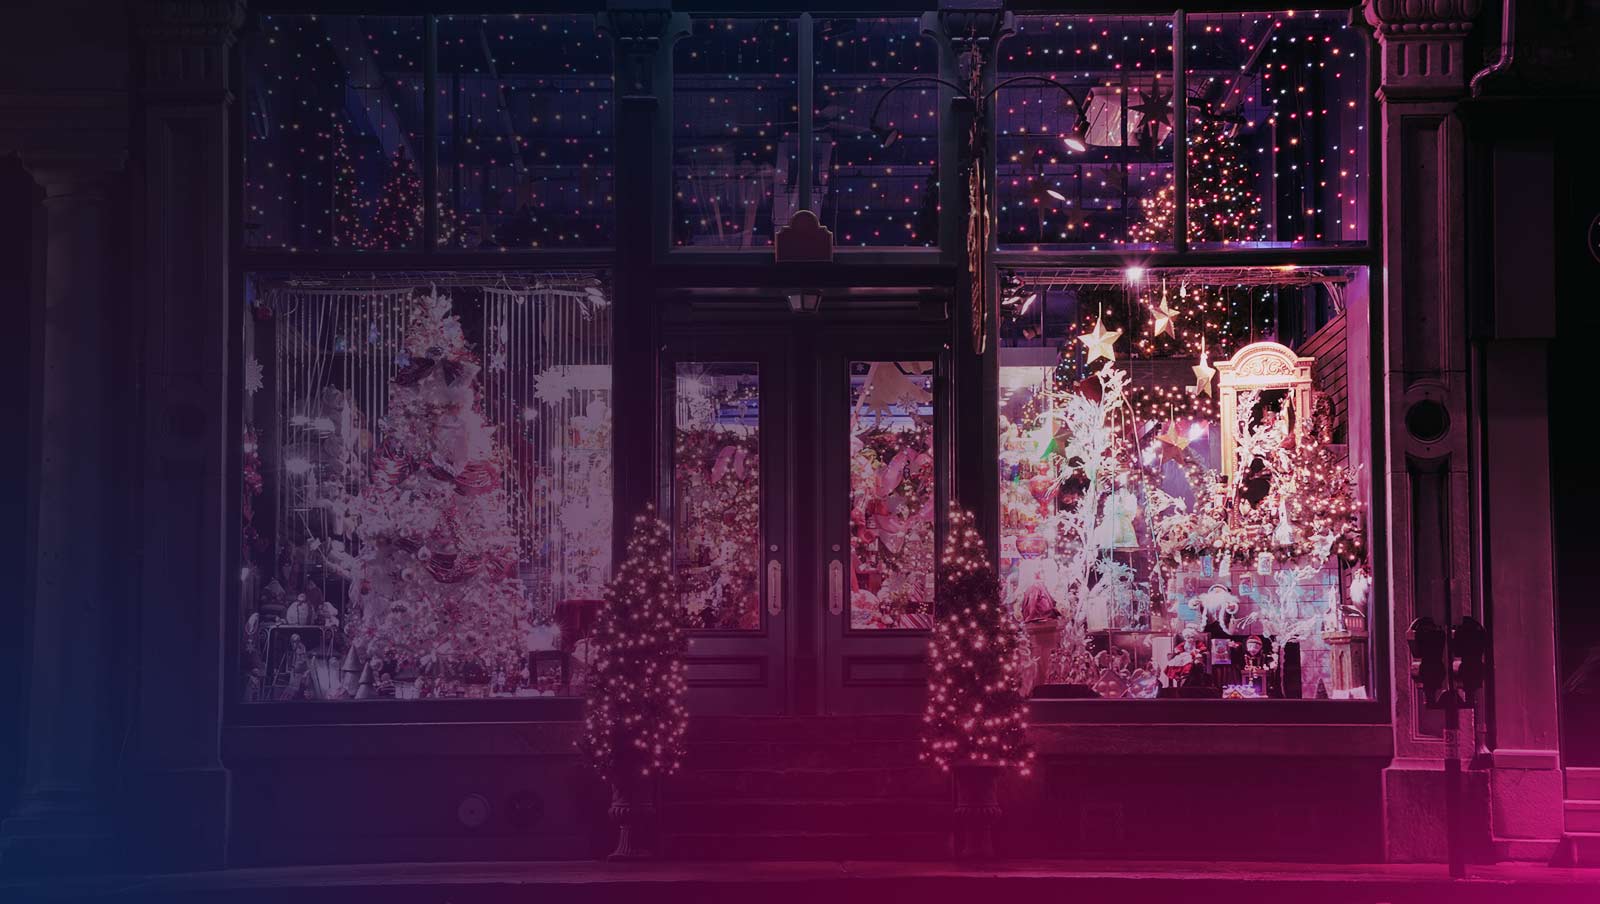 image of holiday lights in store front